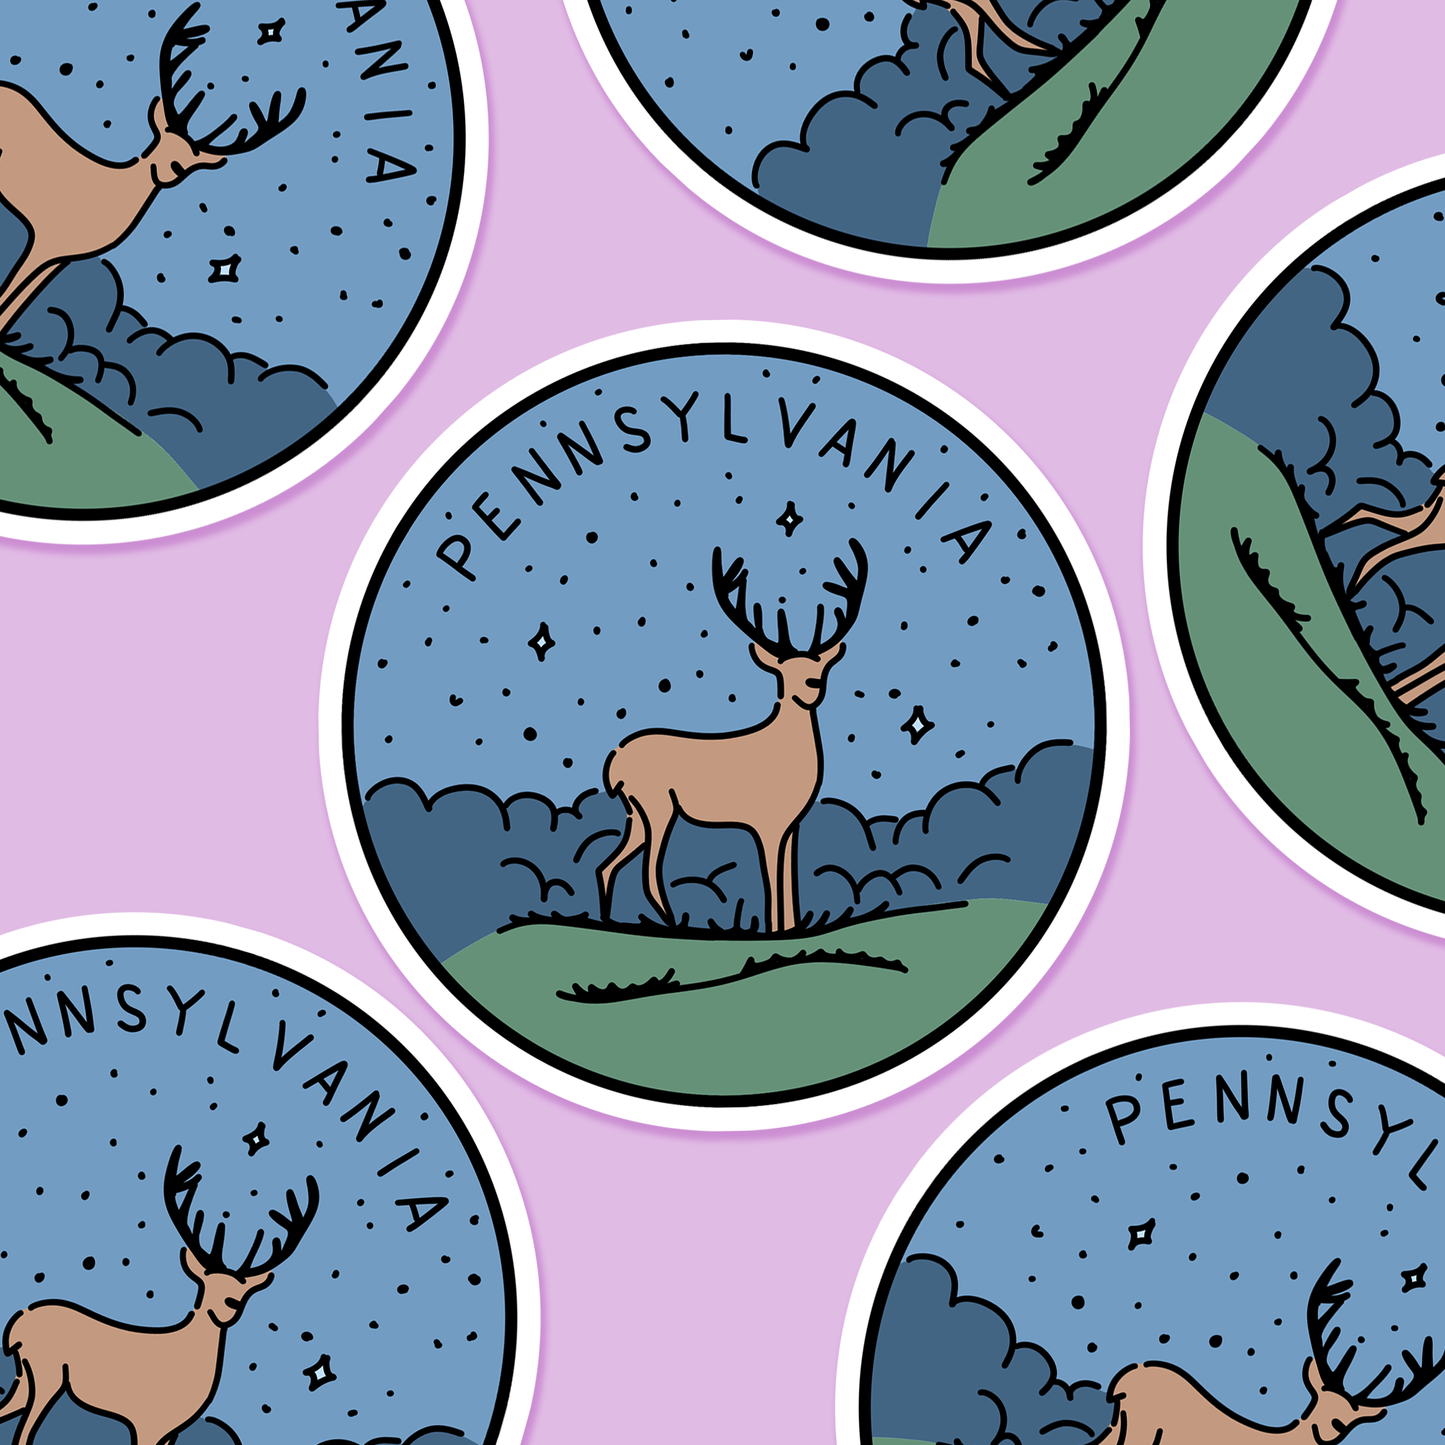 Pennsylvania Illustrated US State 3 x 3 in - Travel Sticker